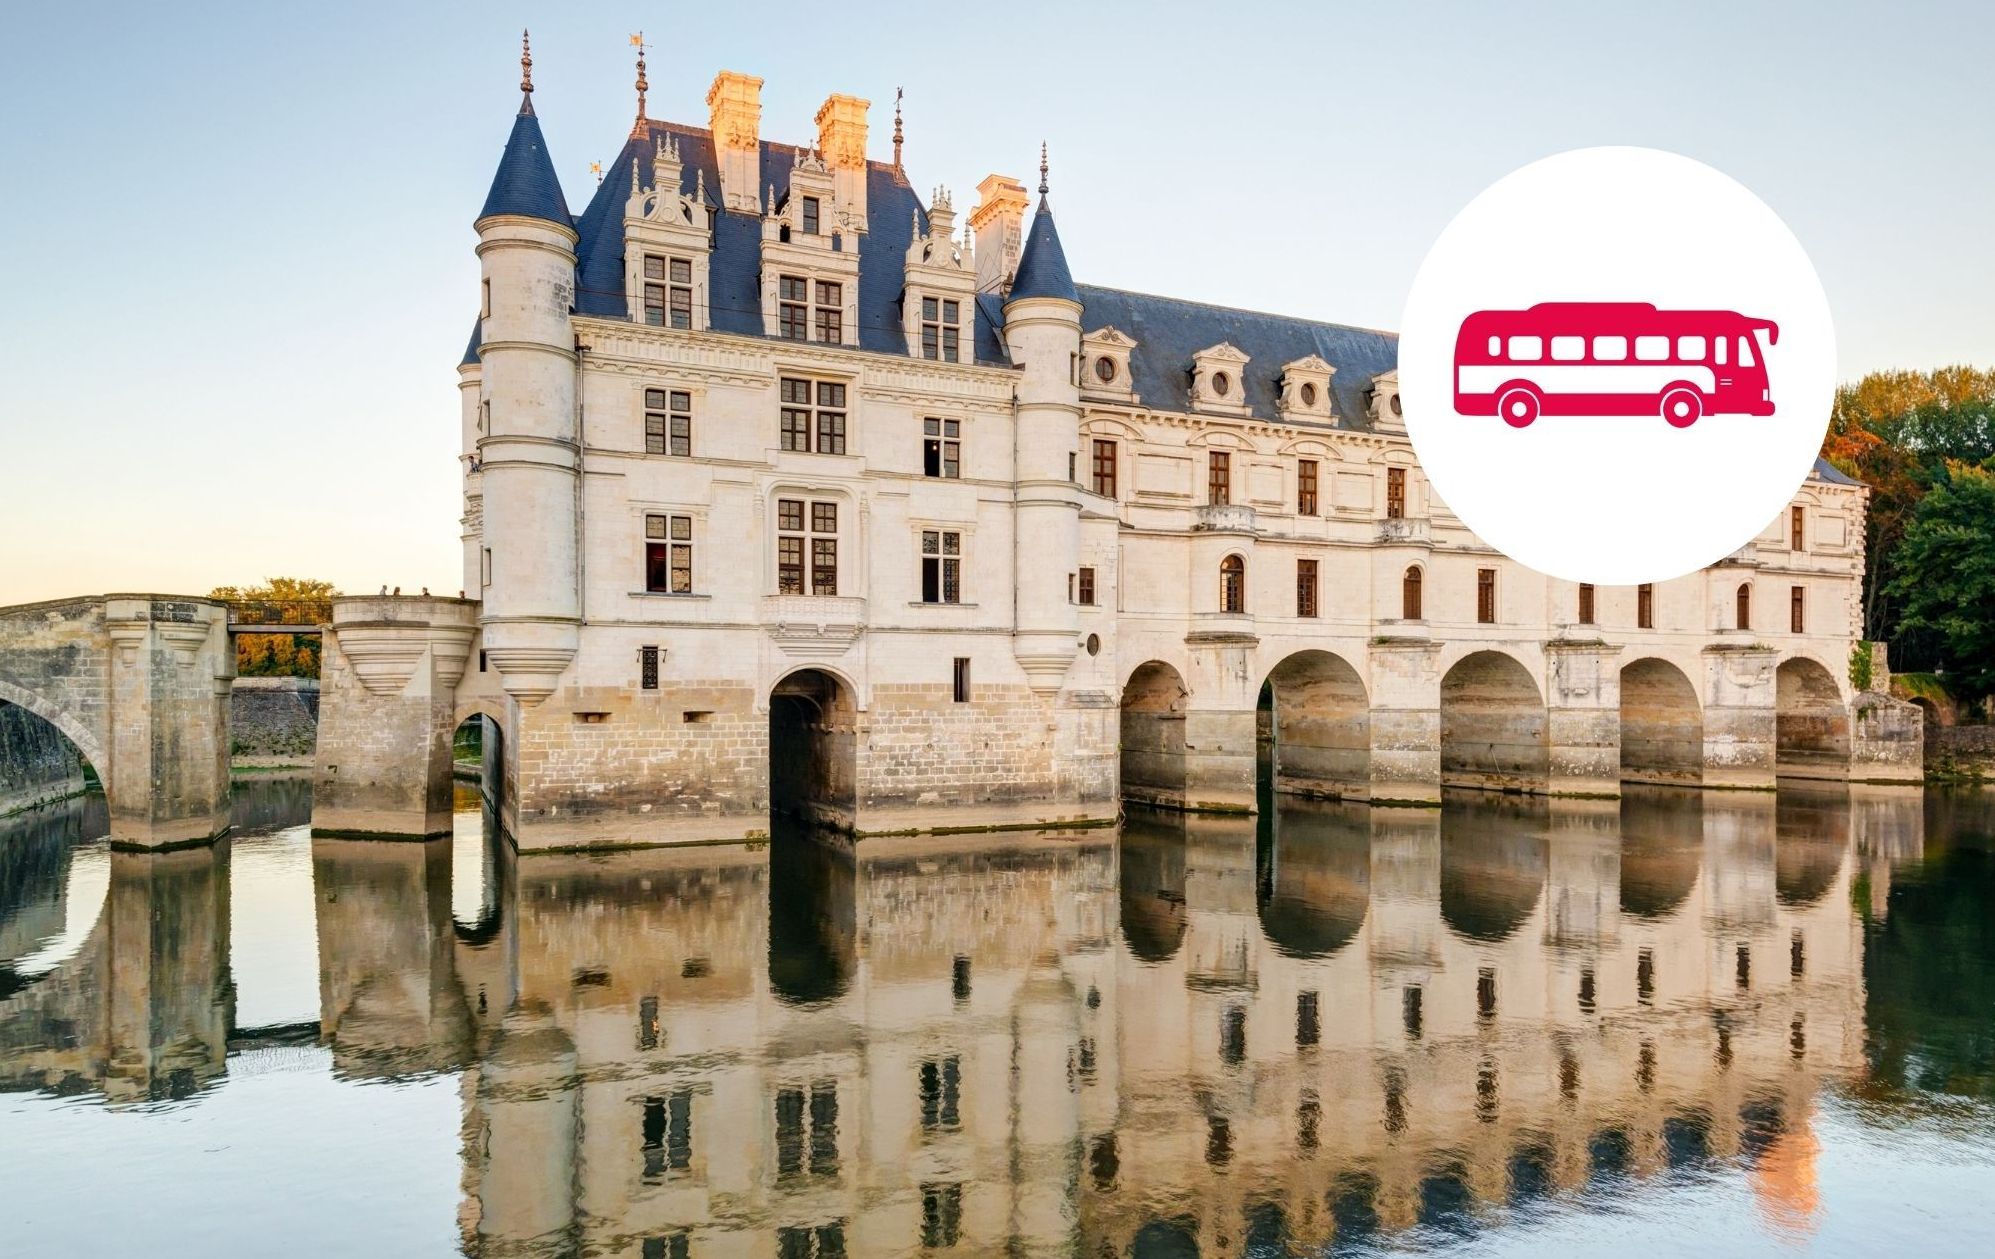 Day trip on your own to Loire castles with transportation from Paris